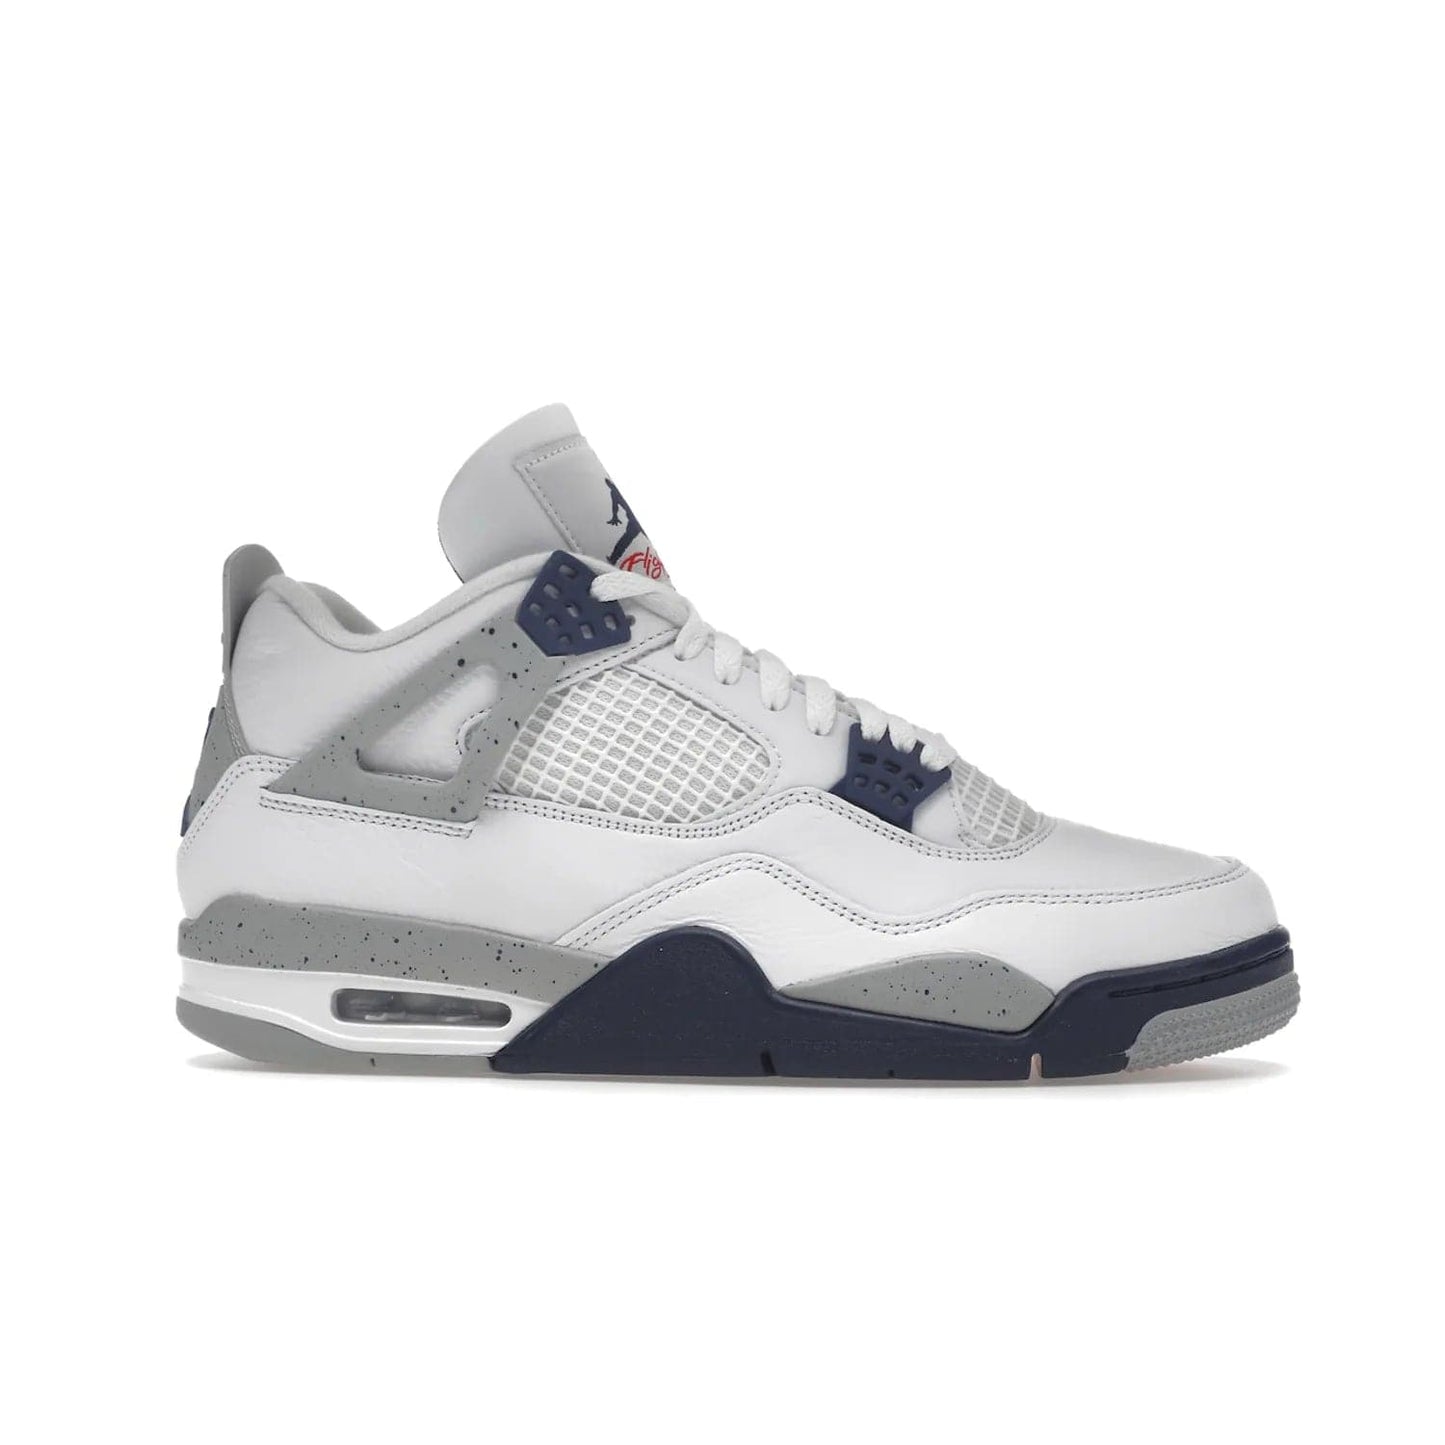 Jordan 4 Retro Midnight Navy - Image 2 - Only at www.BallersClubKickz.com - Shop the Air Jordan Retro 4 White Midnight Navy. Stand out with a classic white leather upper, black support wings, midnight navy eyelets, and Crimson Jumpman tongue tag. Unbeatable comfort with two-tone polyurethane midsole with encapsulated Air technology. Get yours before October 29th, 2022.